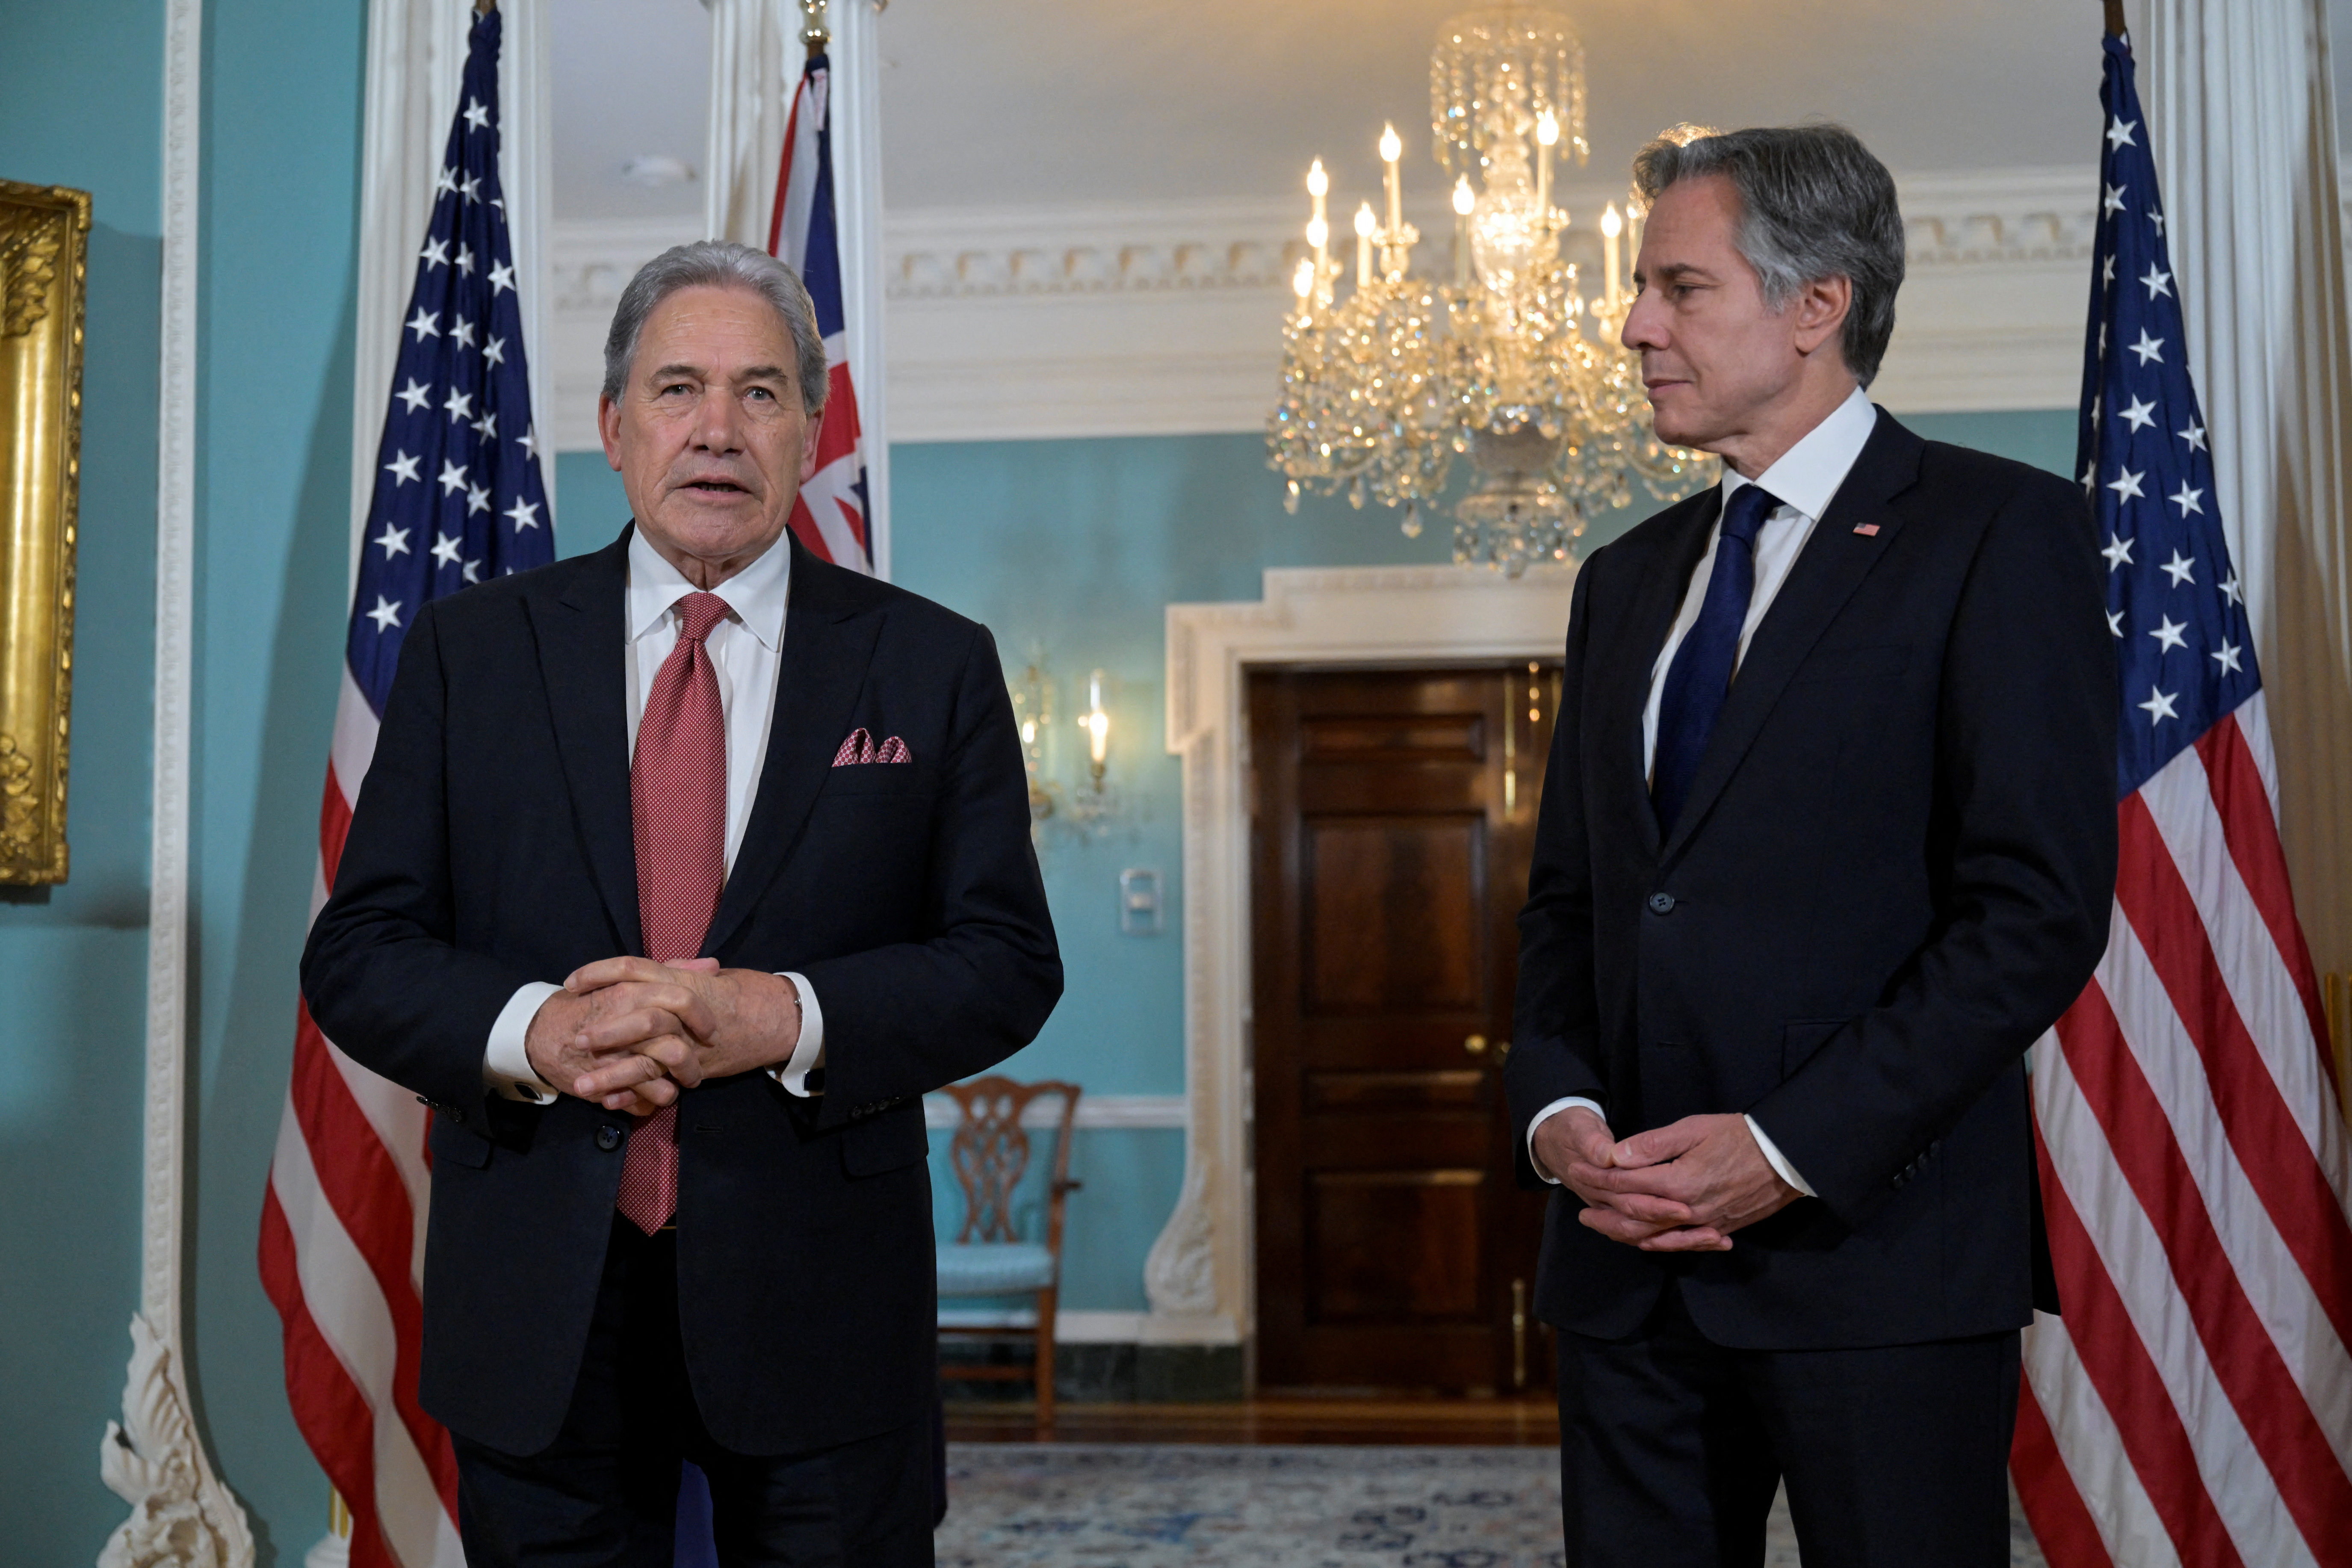 New Zealand Foreign Minister Winston Peters at the U.S. State Department in Washington